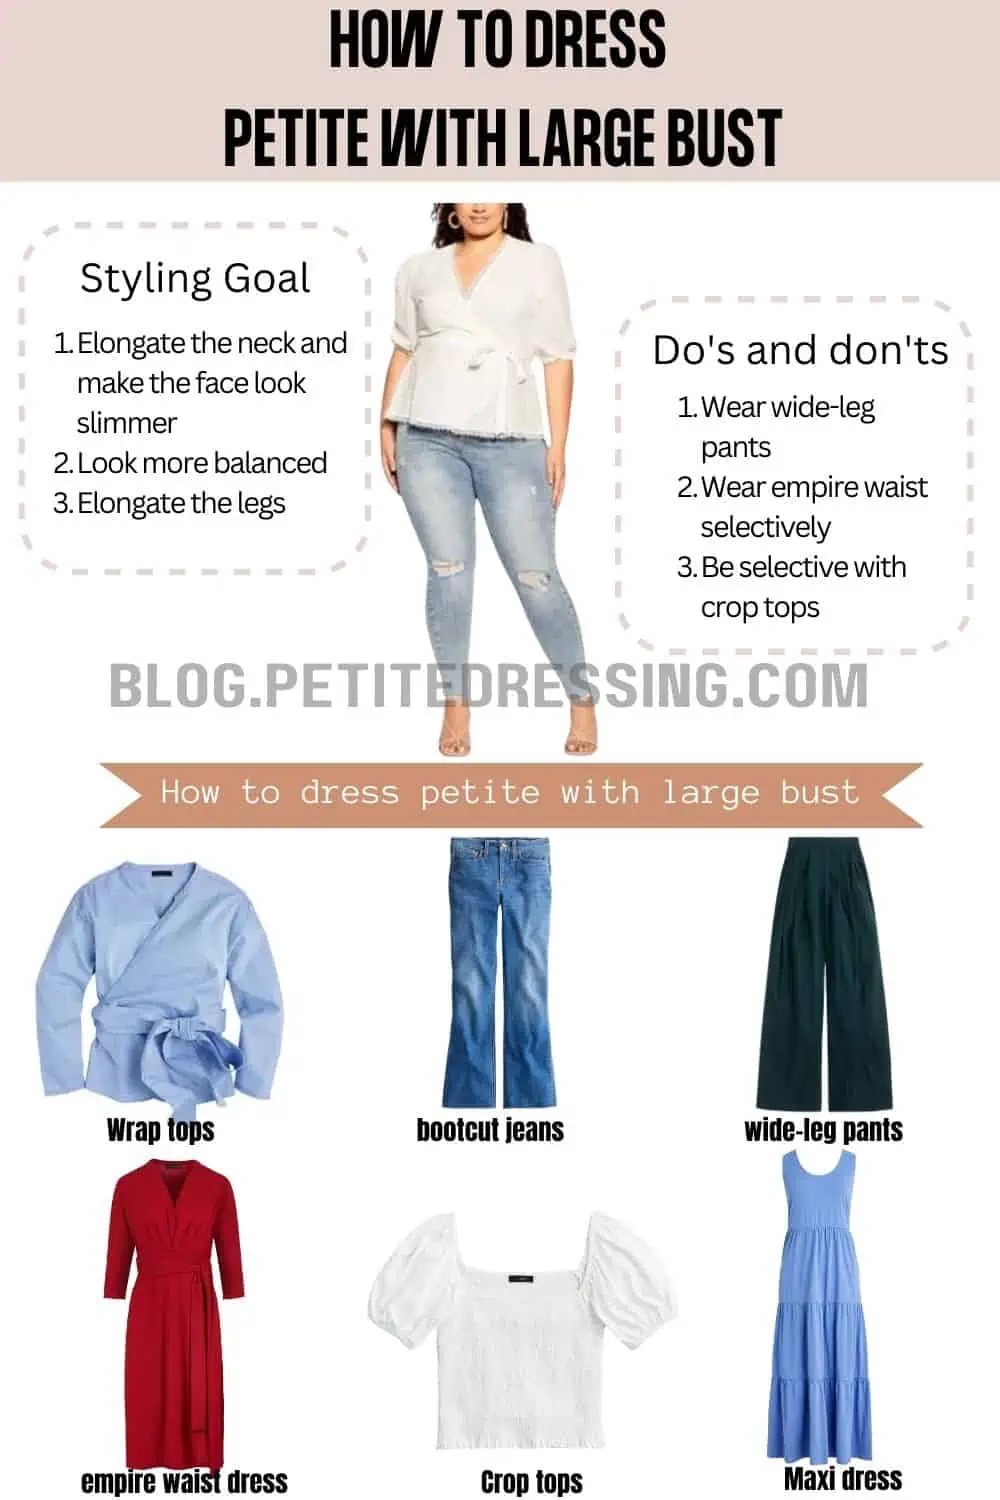 I'm 5'2, here's 19 Best Ways to Dress if You are Petite with Large Bust -  Petite Dressing